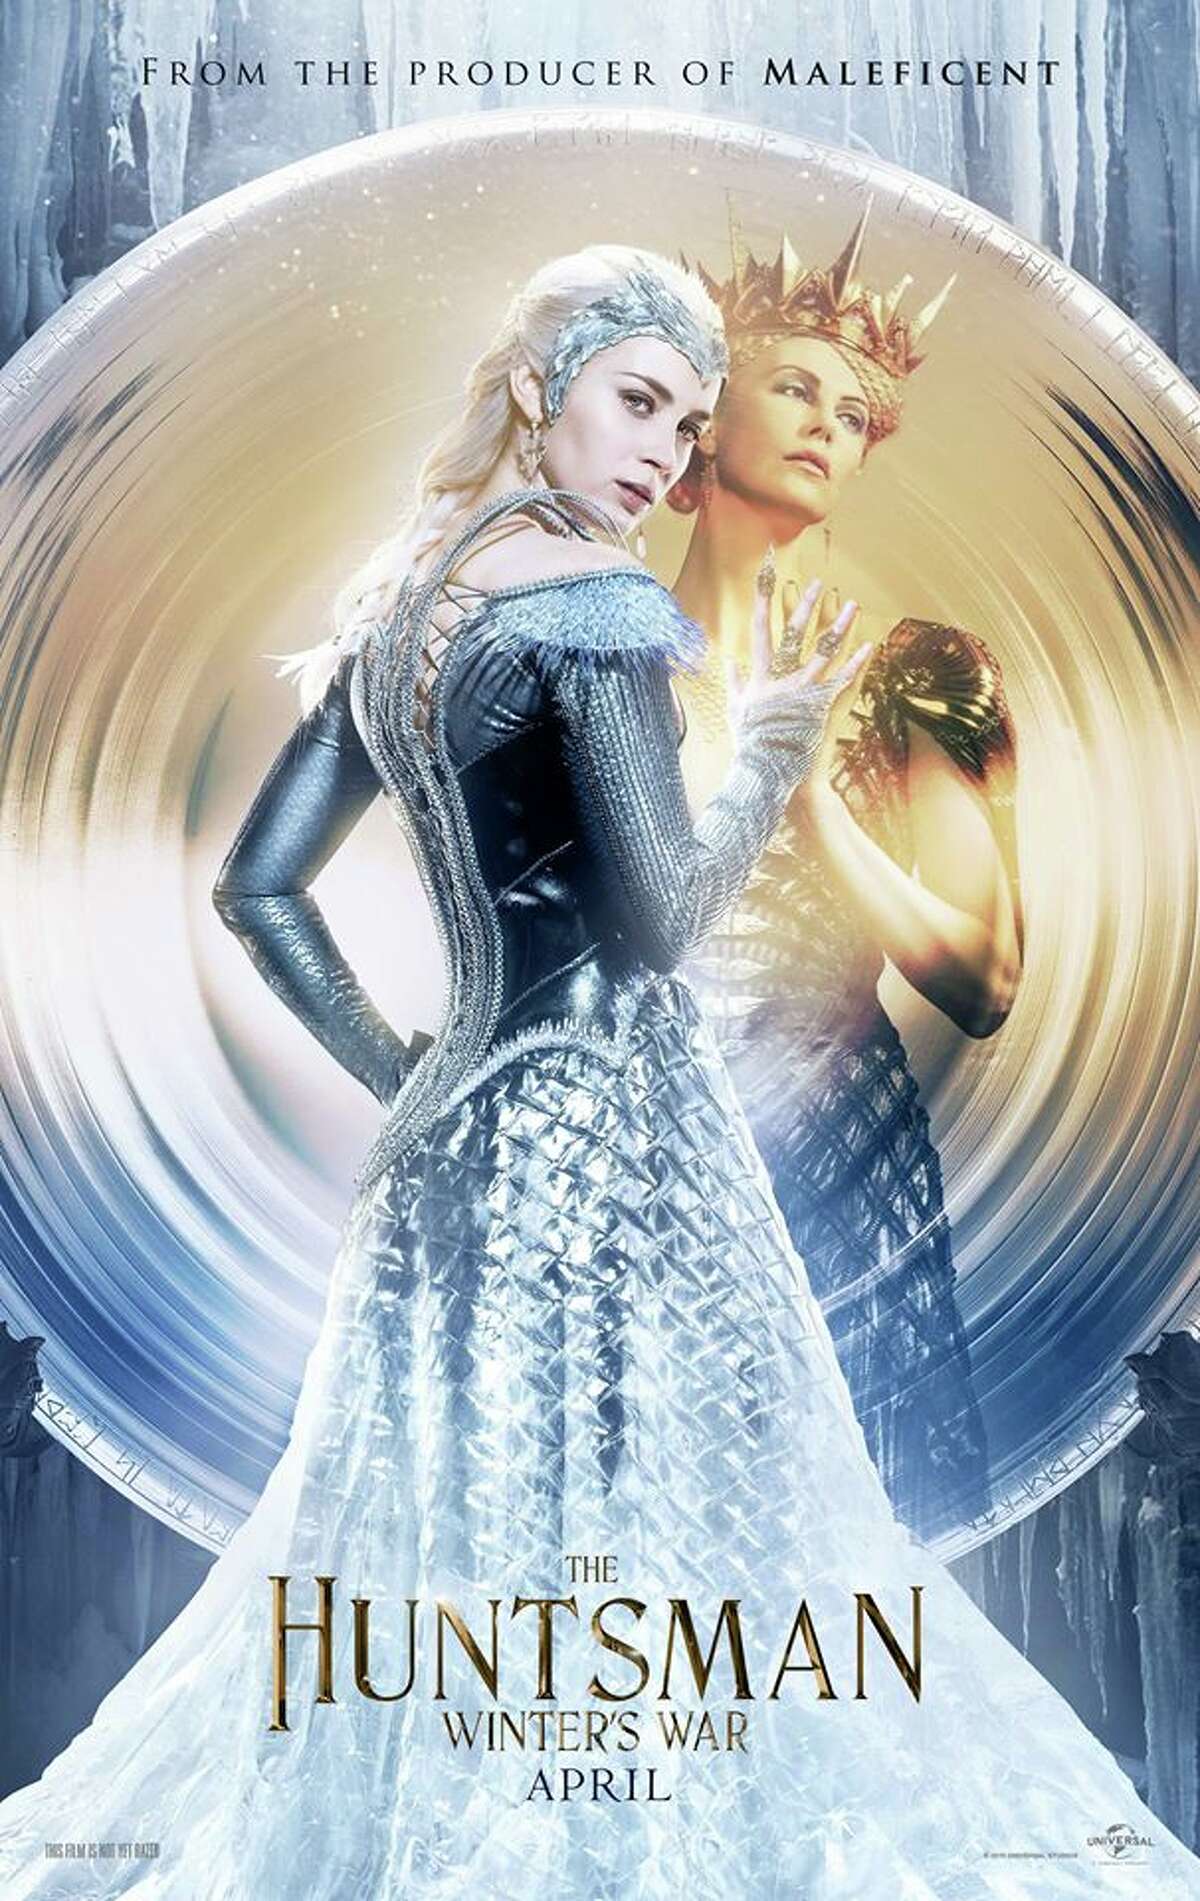 The Huntsman: Winter's War opening April 22. As two evil sisters prepare to conquer the land; two renegades - Eric the Huntsman - who previously aided Snow White in defeating Ravenna, and his forbidden lover, Sara set out to stop them. Starring Chris Hemsworth, Jessica Chastain, Charlize Theron, Emily Blunt.